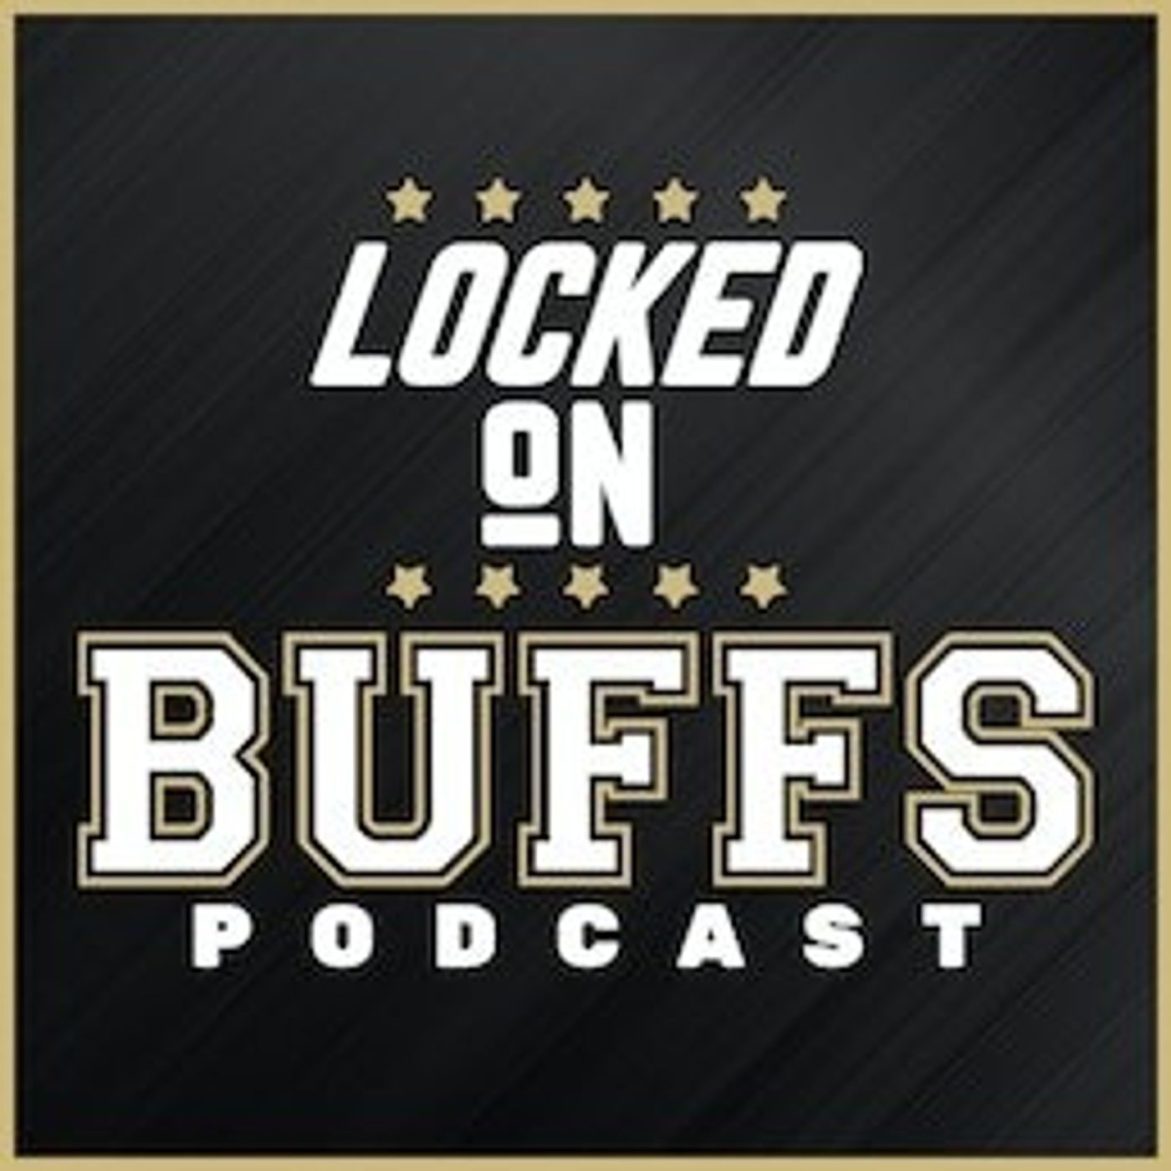 Black Podcasting - Deion Sanders and Colorado Are In Their Villain Era